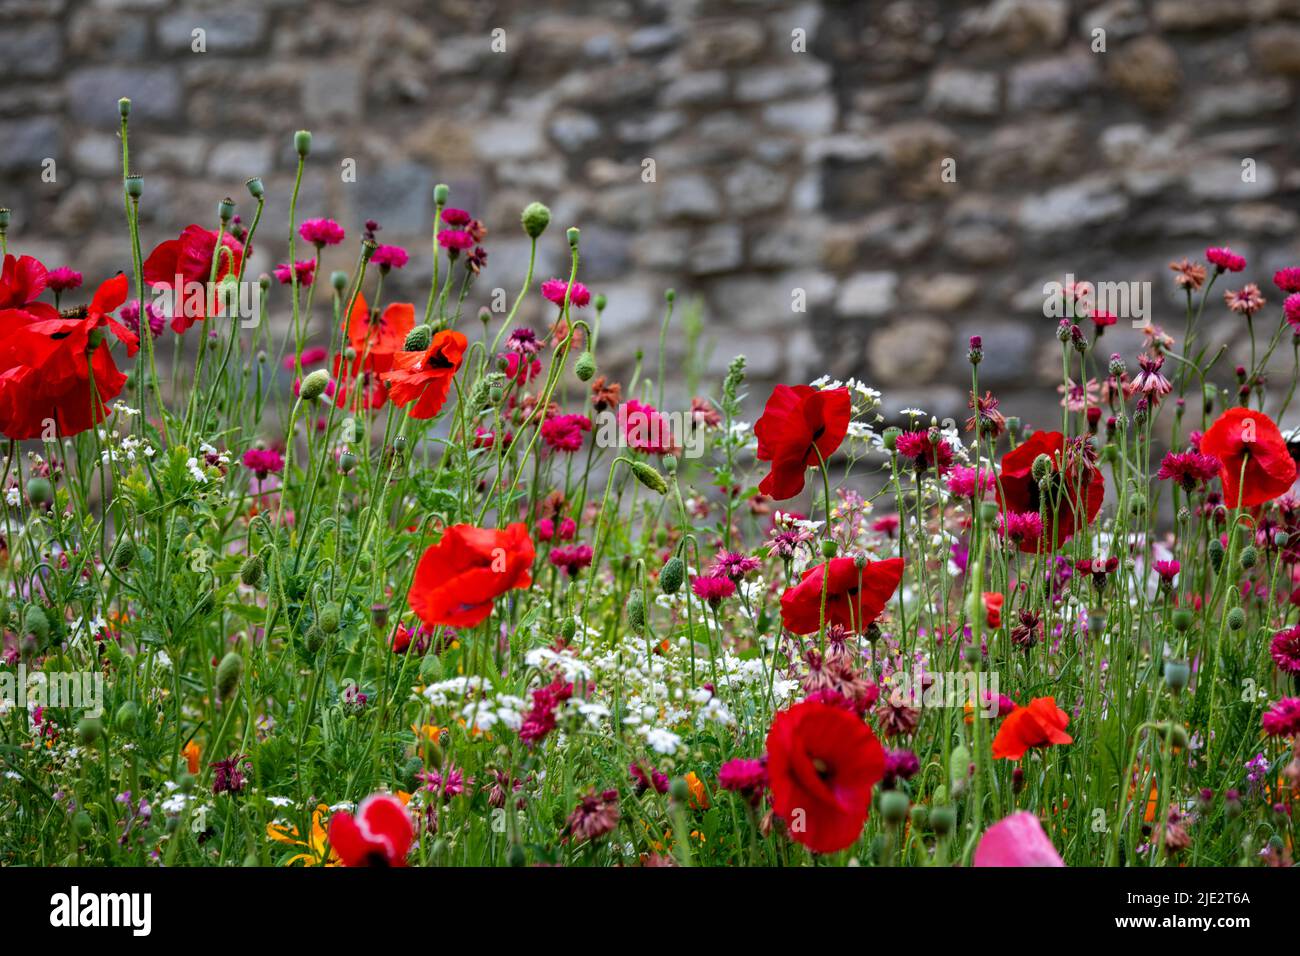 Summer wild flower 'Superbloom' display in the moat at The Tower of London, England celebrating the platinum jubilee year of HM The Queen. Stock Photo